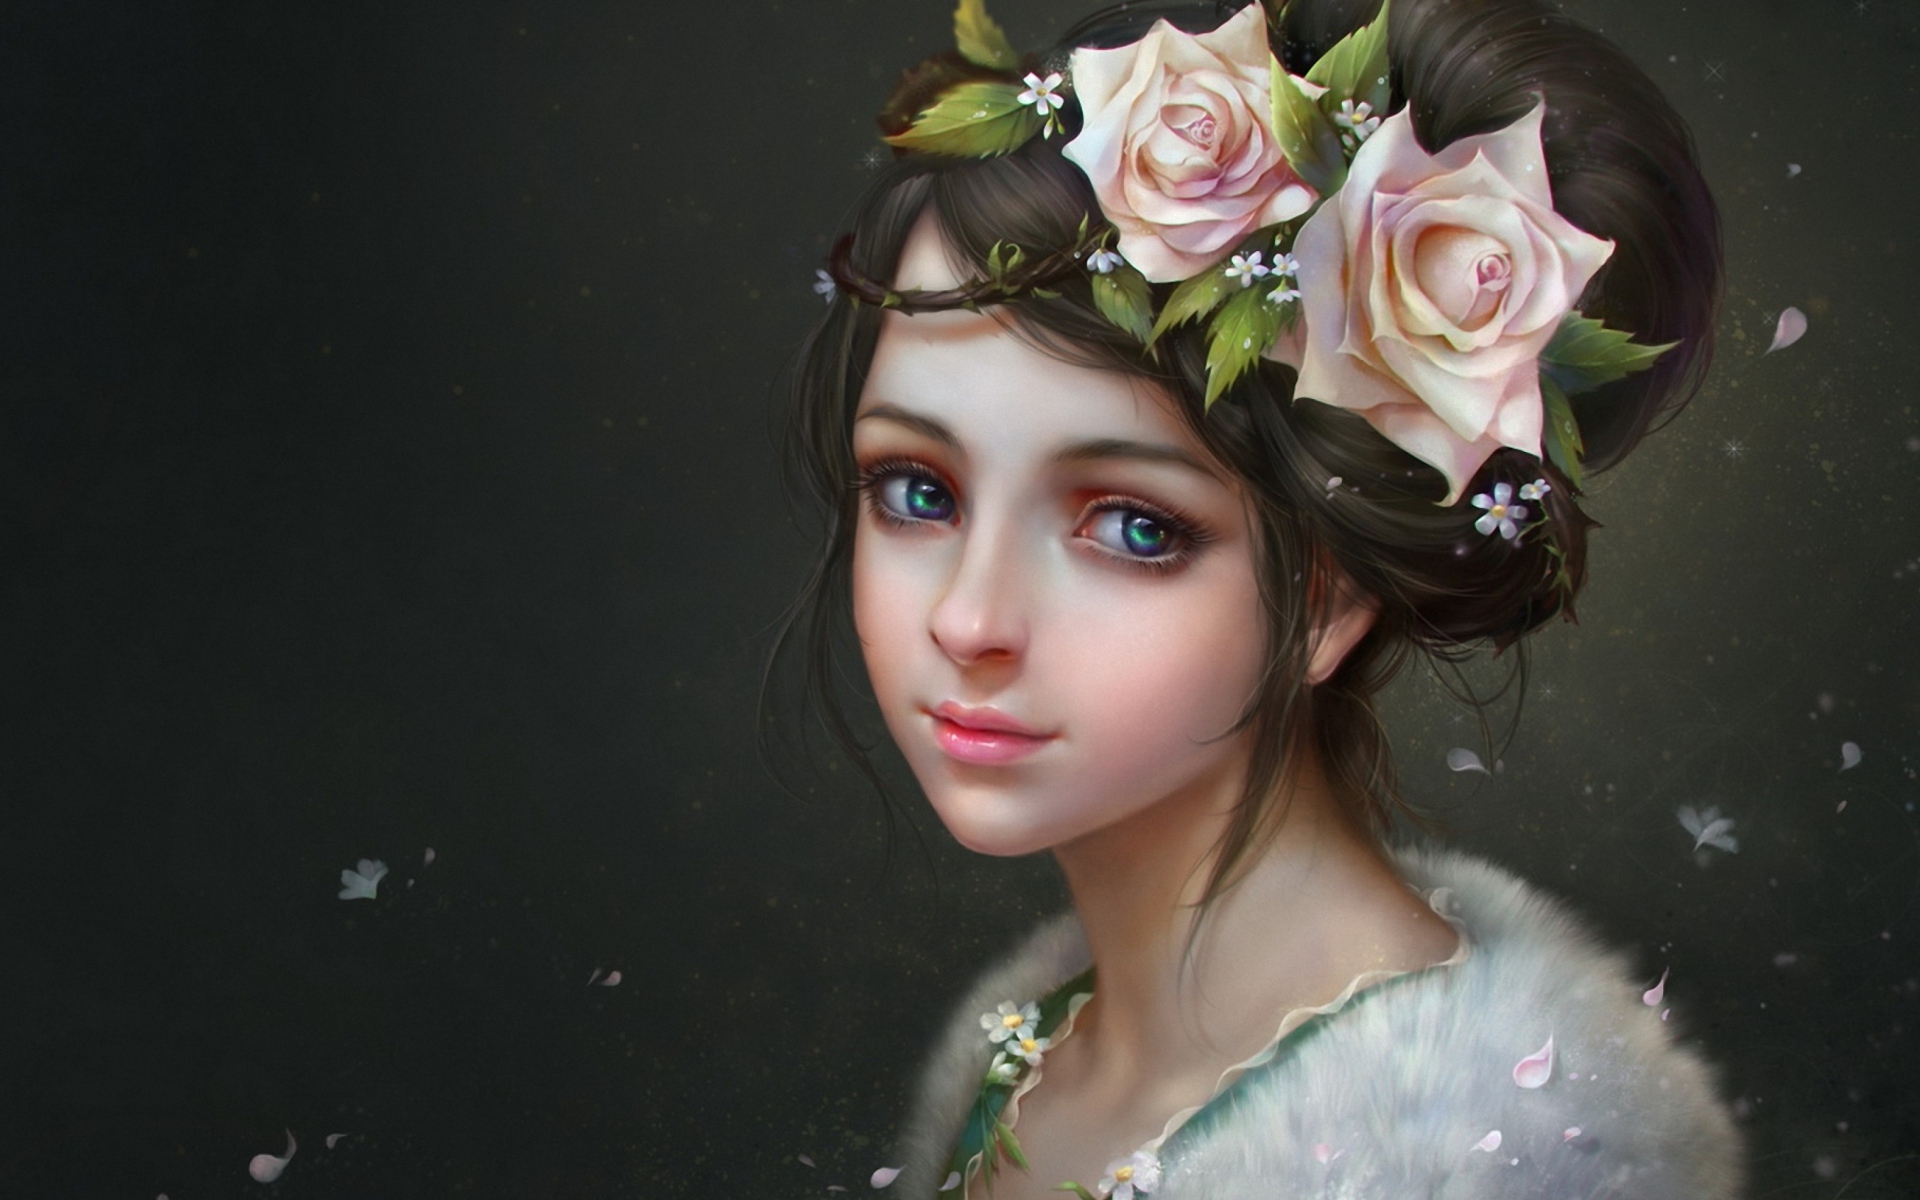 Girl With Roses In Her Hair Painting screenshot #1 1920x1200